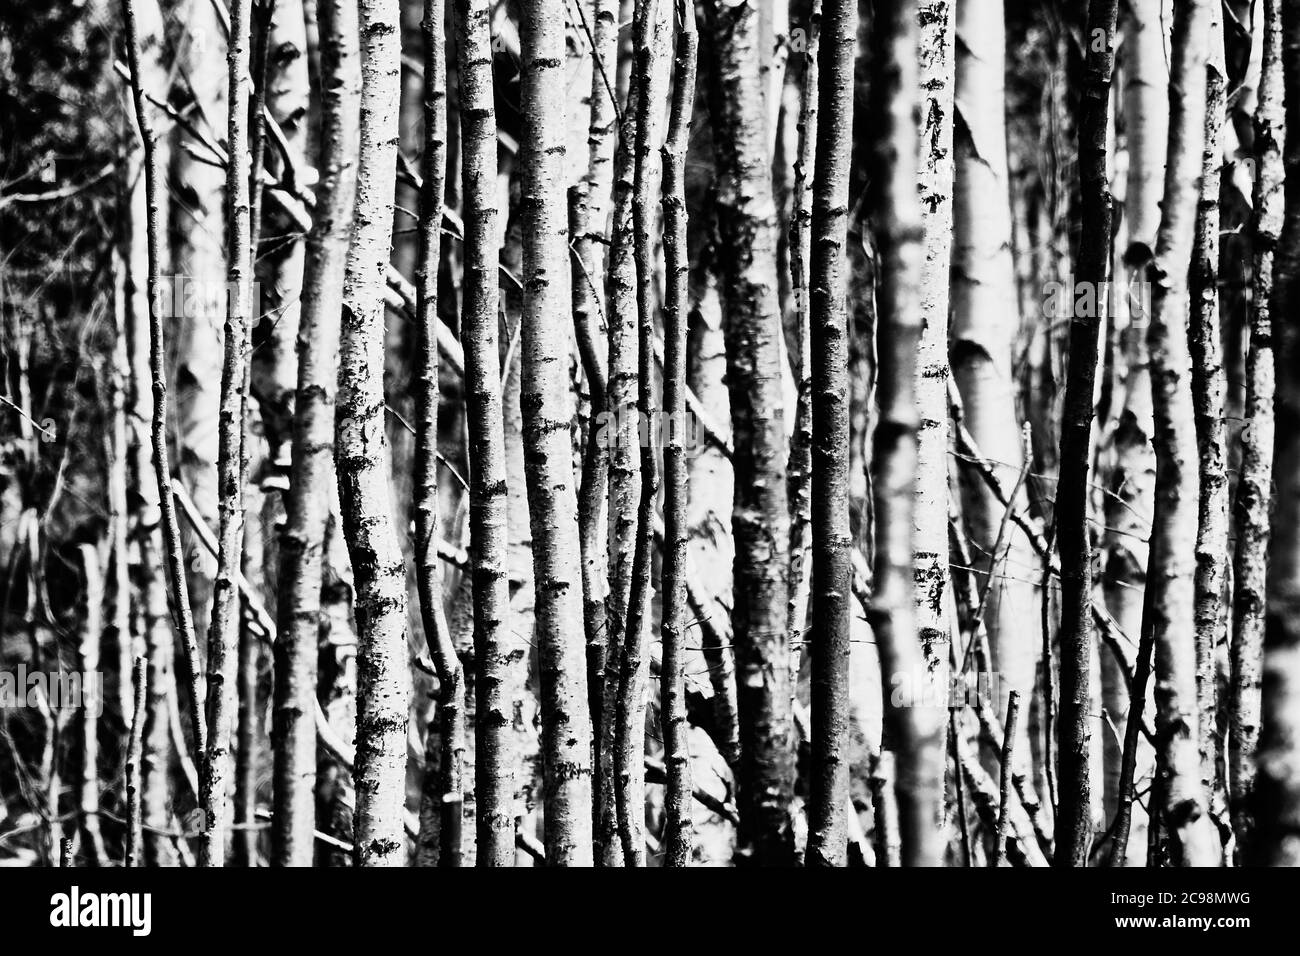 Abstract photo of dense birch trunks in hard black and white contrast Stock Photo